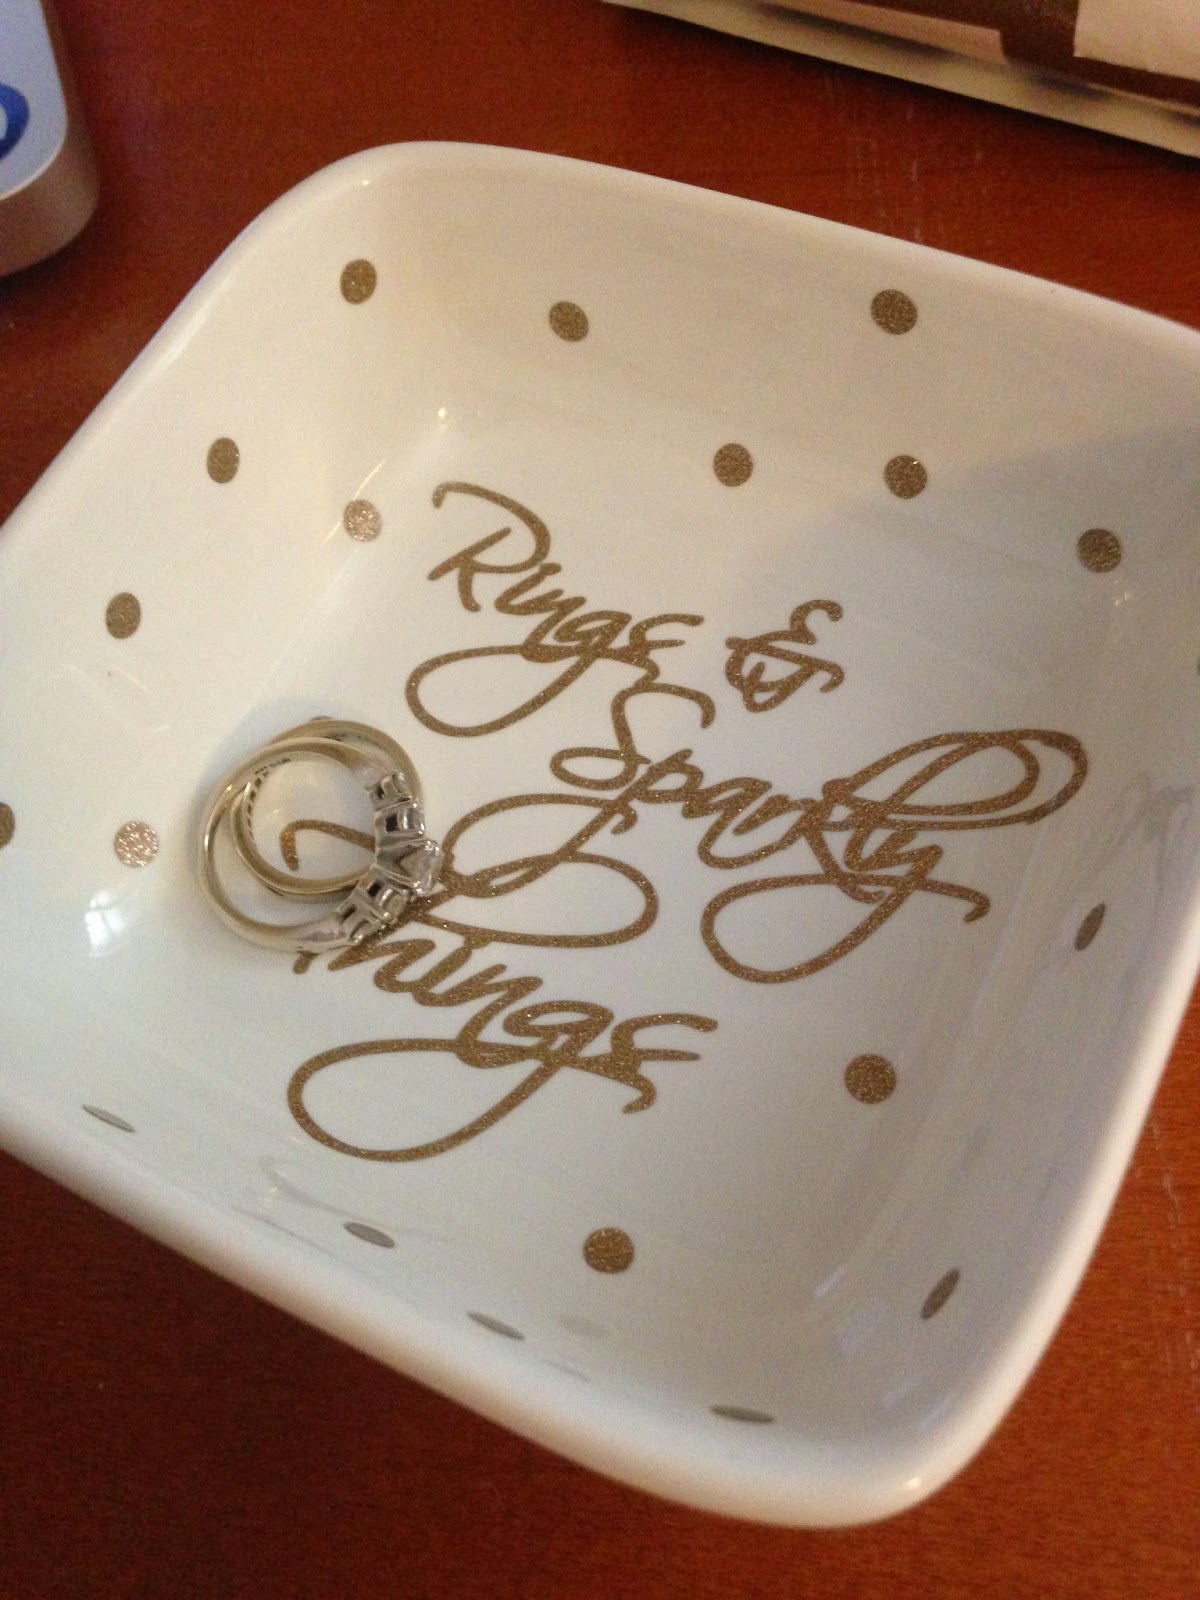 DIY, do it yourself, ring dish, Silhouette tutorial, text, polka dots